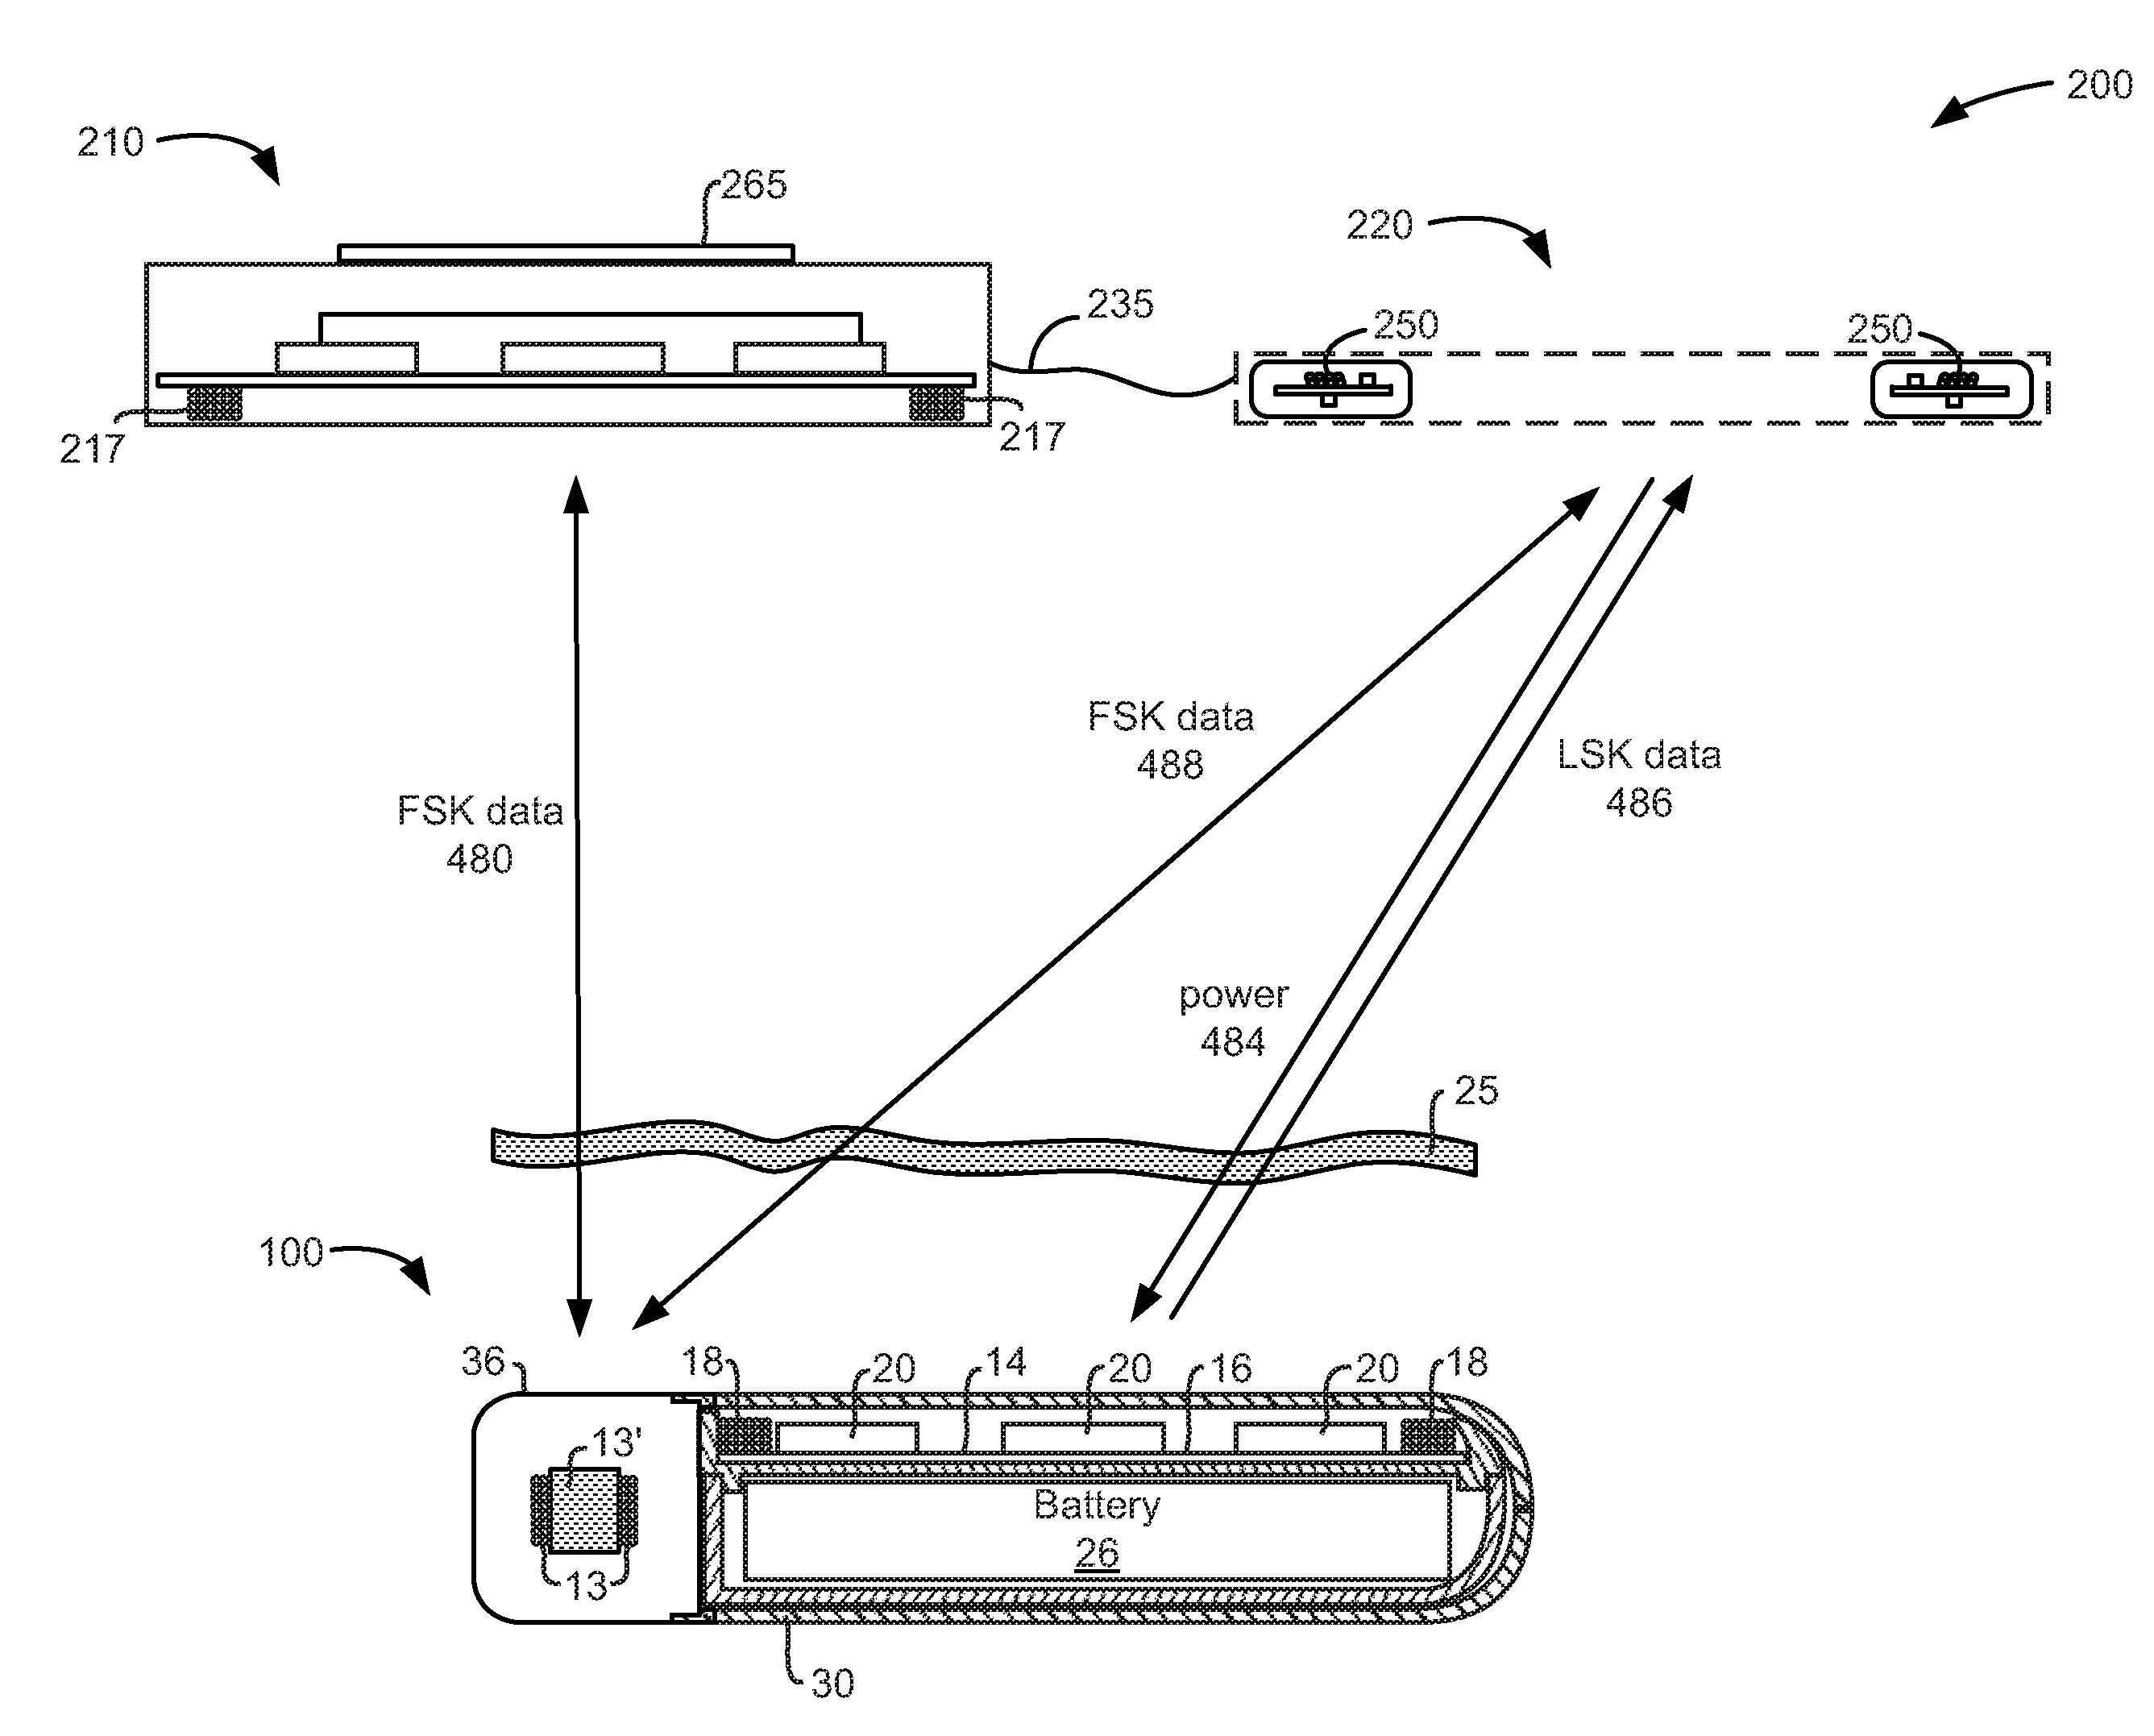 External Controller/Charger System for an Implantable Medical Device Capable of Automatically Providing Data Telemetry Through a Charging Coil During a Charging Session